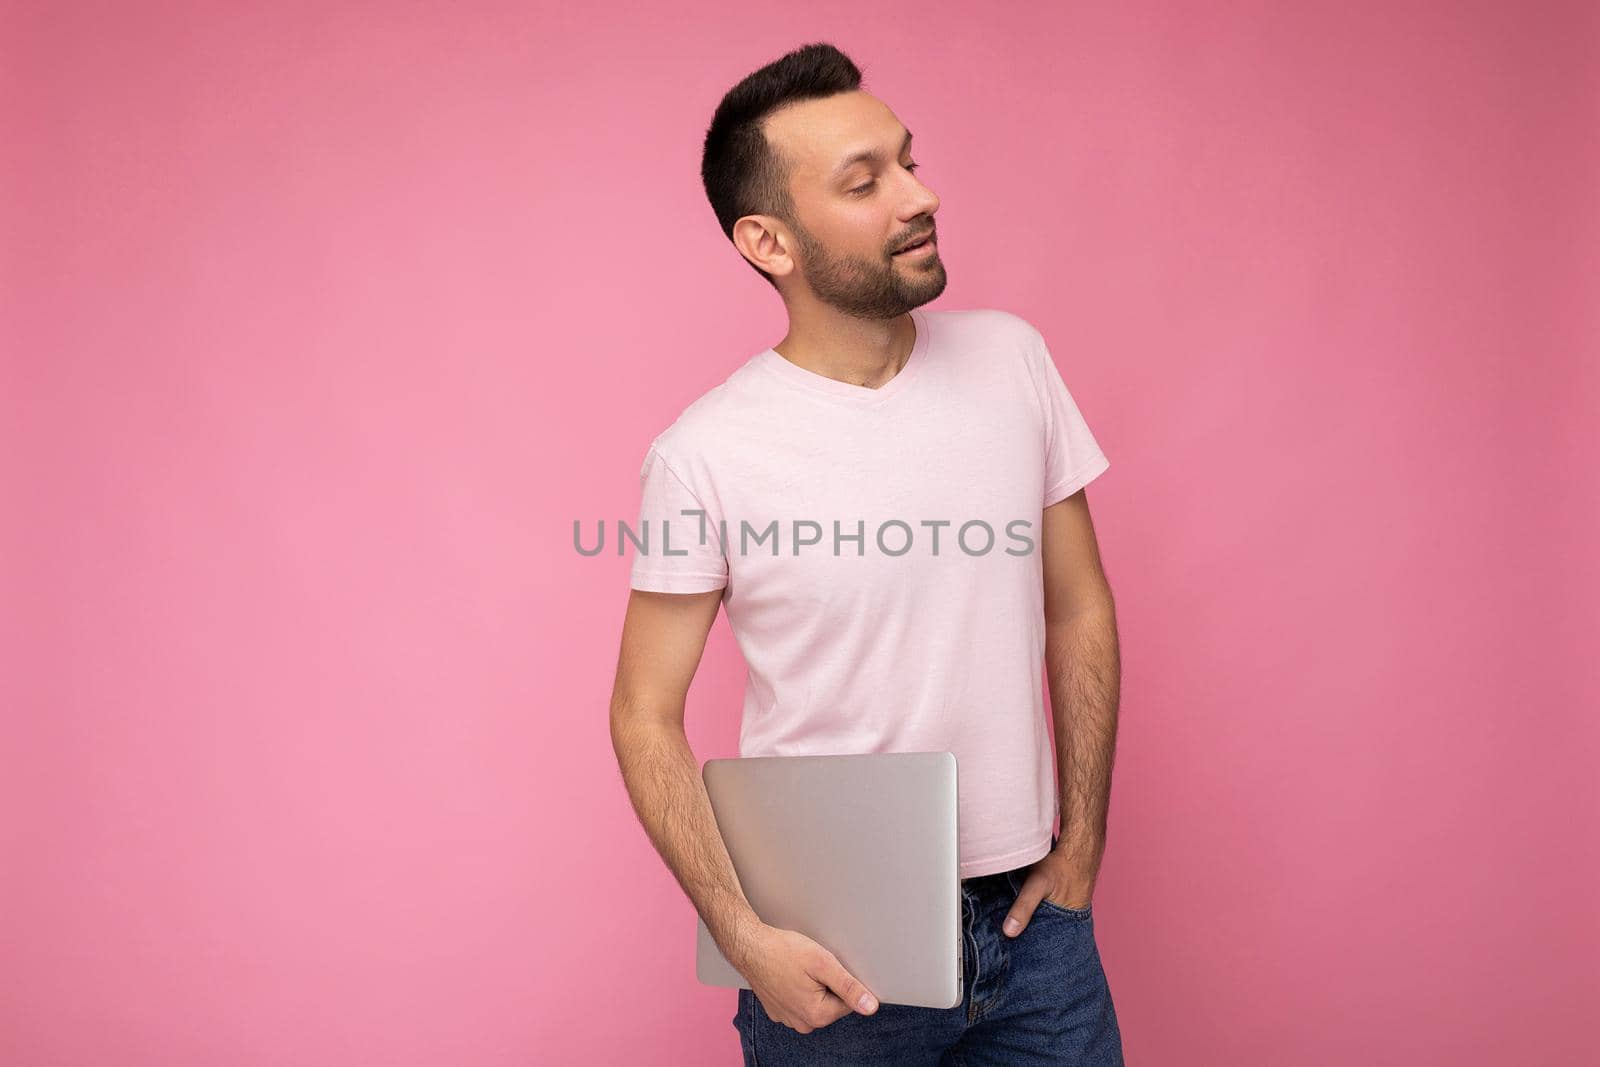 Handsome happy young unshaven man holding laptop computer looking to side in t-shirt on isolated pink background by TRMK